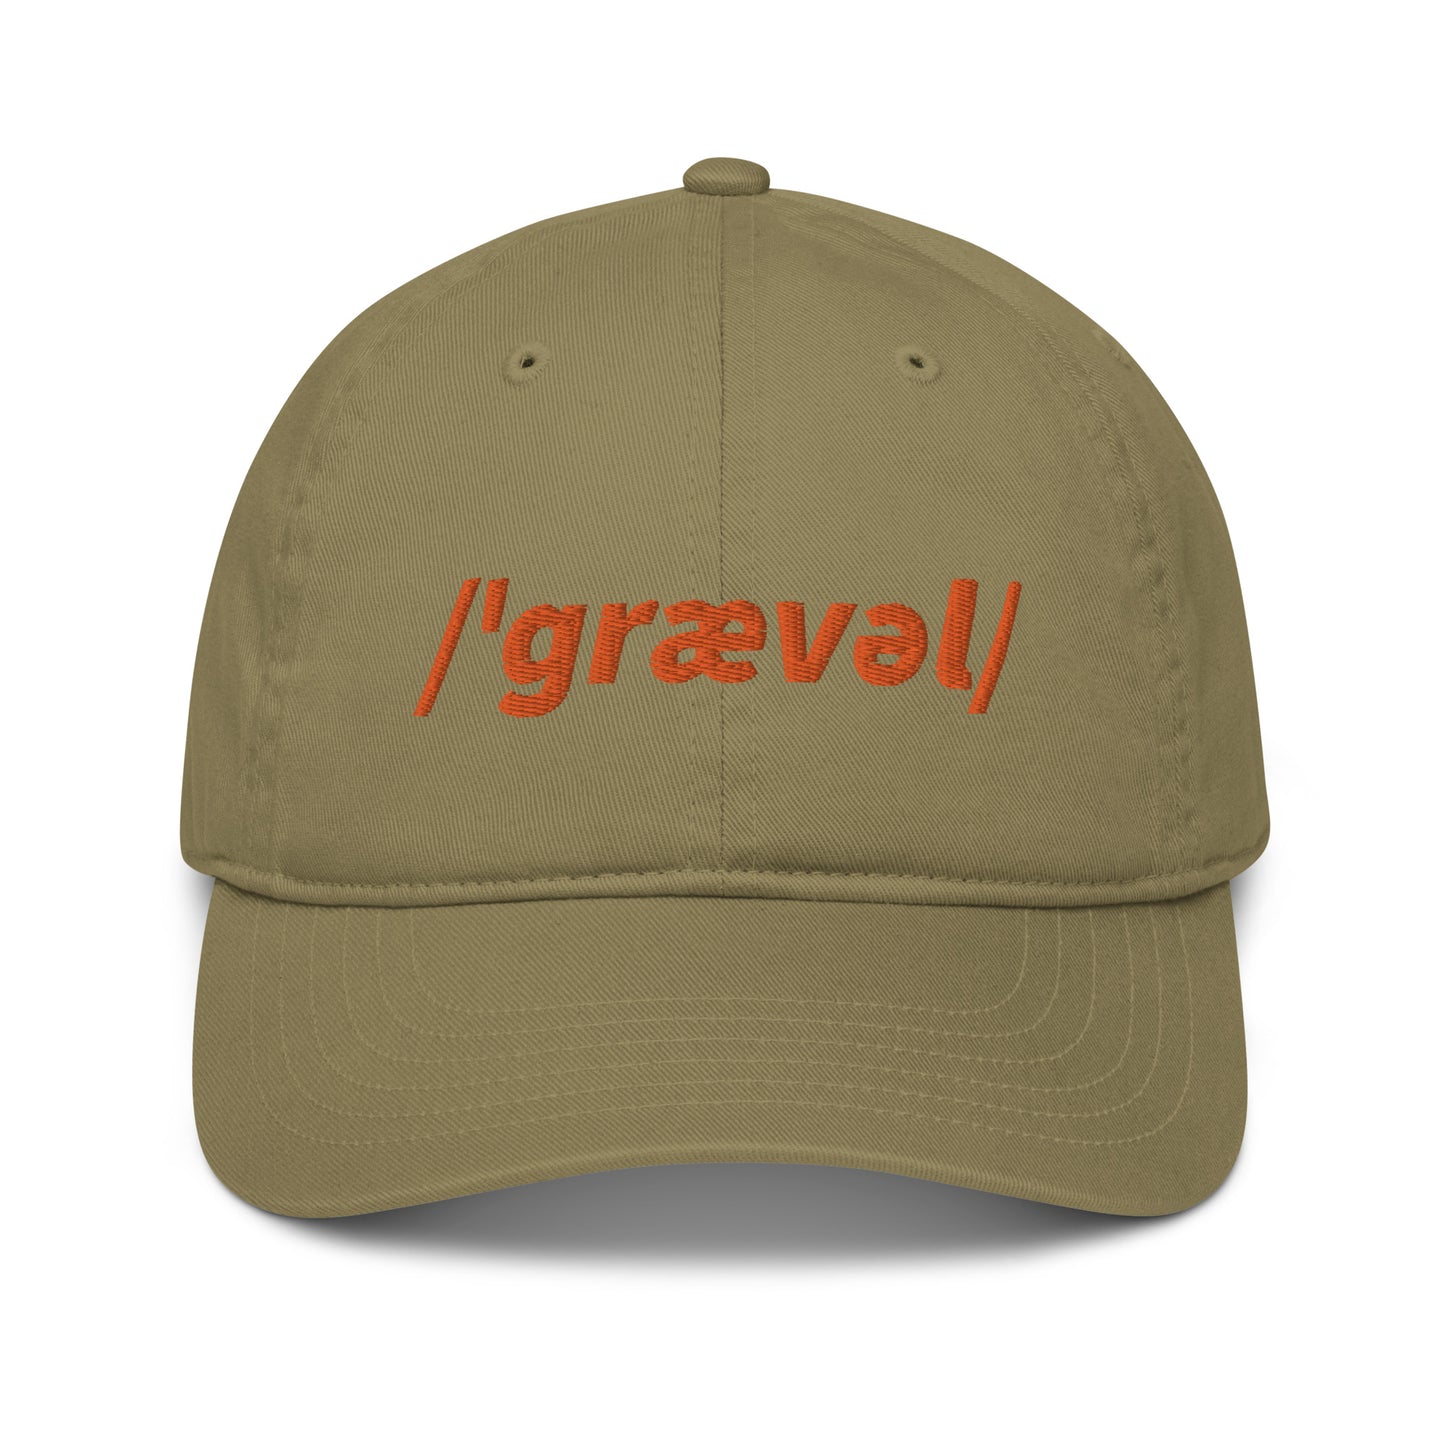 Gravel Cyclist Embroidered Organic Baseball Cap, Phonetic Spelling, Adult